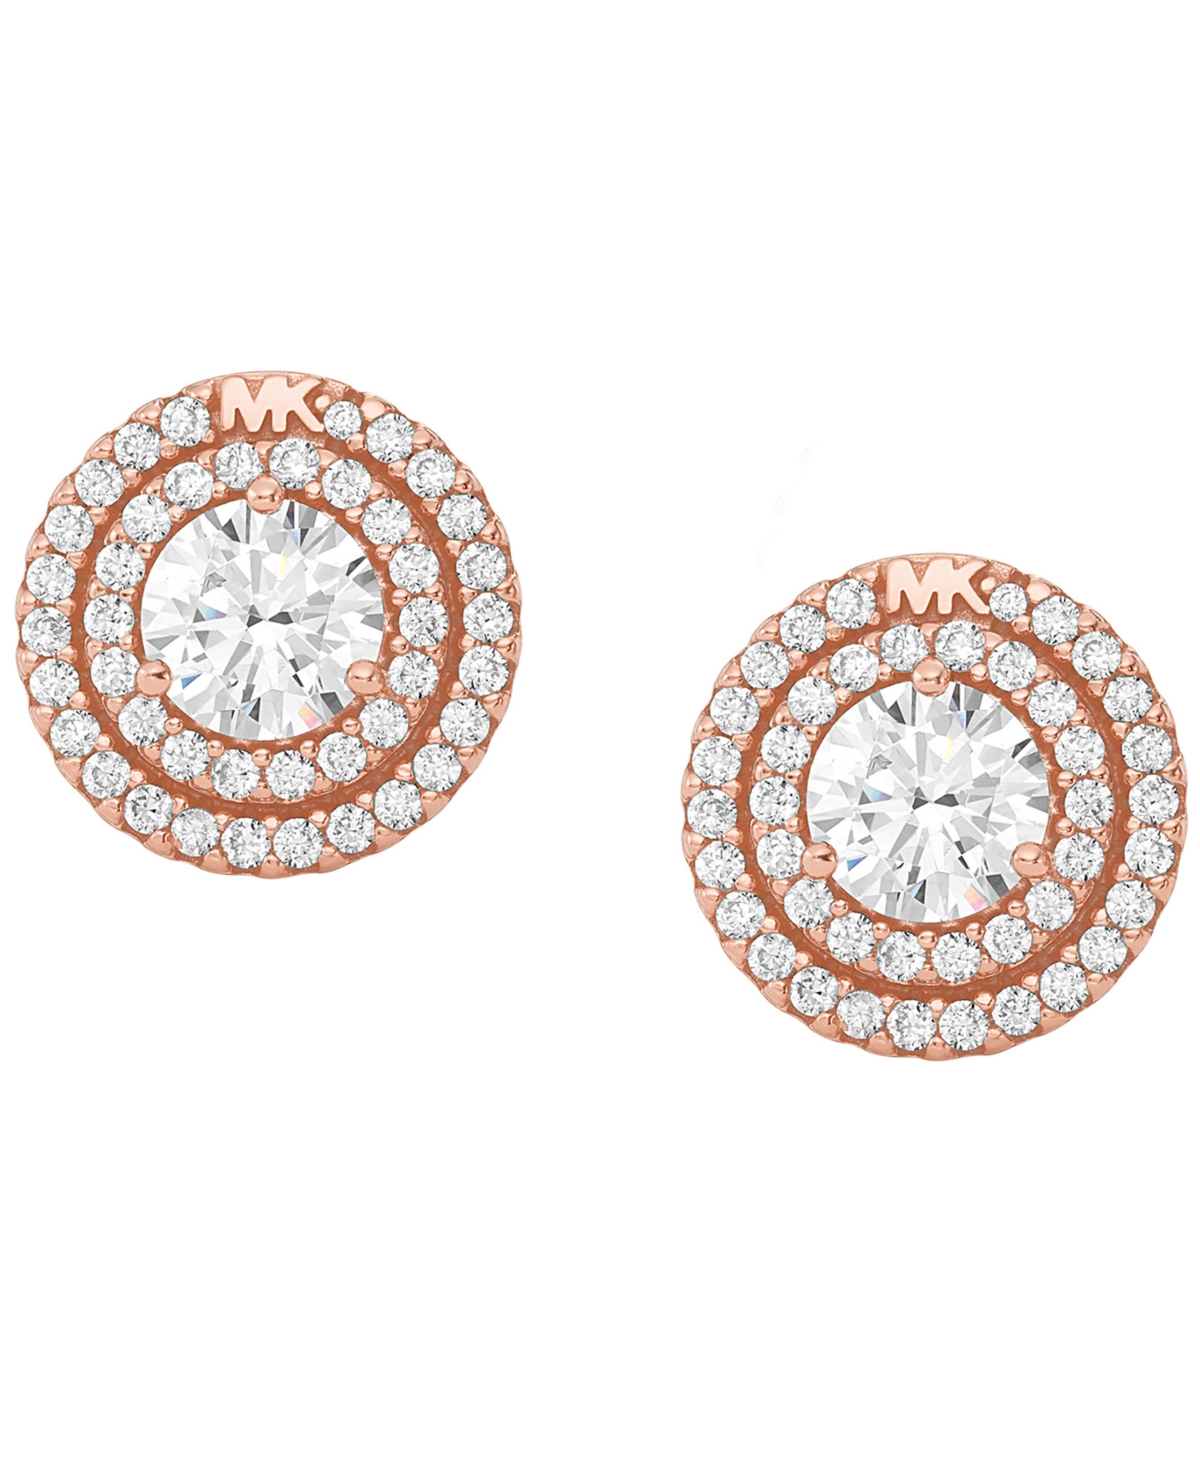 Michael Kors Sterling Silver Pave Halo Stud Earrings In Rose Gold Plating